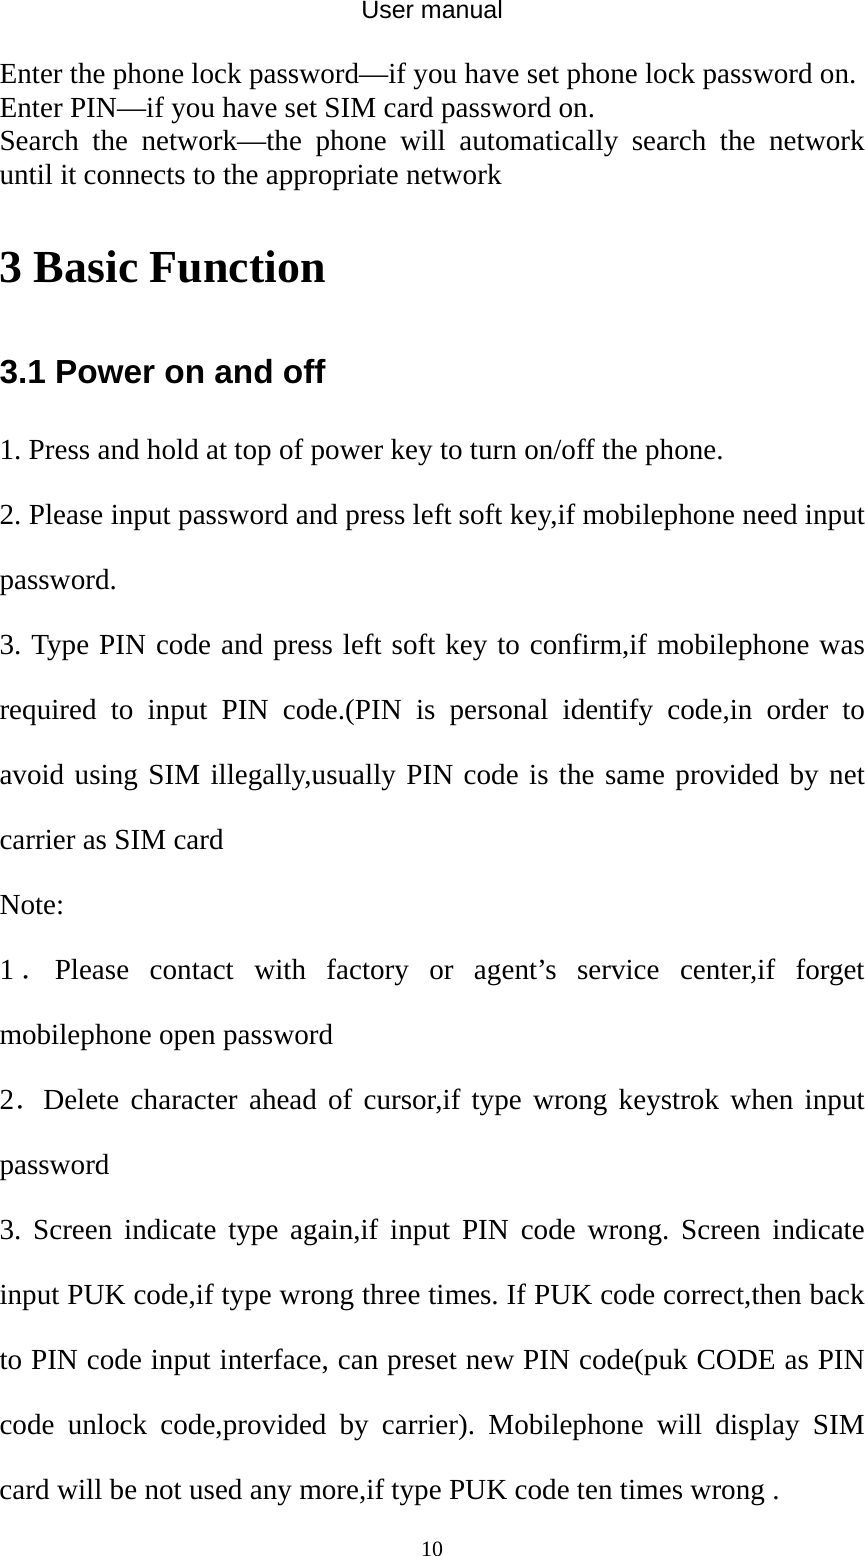 User manual  10Enter the phone lock password—if you have set phone lock password on. Enter PIN—if you have set SIM card password on. Search the network—the phone will automatically search the network until it connects to the appropriate network 3 Basic Function 3.1 Power on and off 1. Press and hold at top of power key to turn on/off the phone.   2. Please input password and press left soft key,if mobilephone need input password. 3. Type PIN code and press left soft key to confirm,if mobilephone was required to input PIN code.(PIN is personal identify code,in order to avoid using SIM illegally,usually PIN code is the same provided by net carrier as SIM card Note: 1．Please contact with factory or agent’s service center,if forget mobilephone open password 2．Delete character ahead of cursor,if type wrong keystrok when input password 3. Screen indicate type again,if input PIN code wrong. Screen indicate input PUK code,if type wrong three times. If PUK code correct,then back to PIN code input interface, can preset new PIN code(puk CODE as PIN code unlock code,provided by carrier). Mobilephone will display SIM card will be not used any more,if type PUK code ten times wrong . 